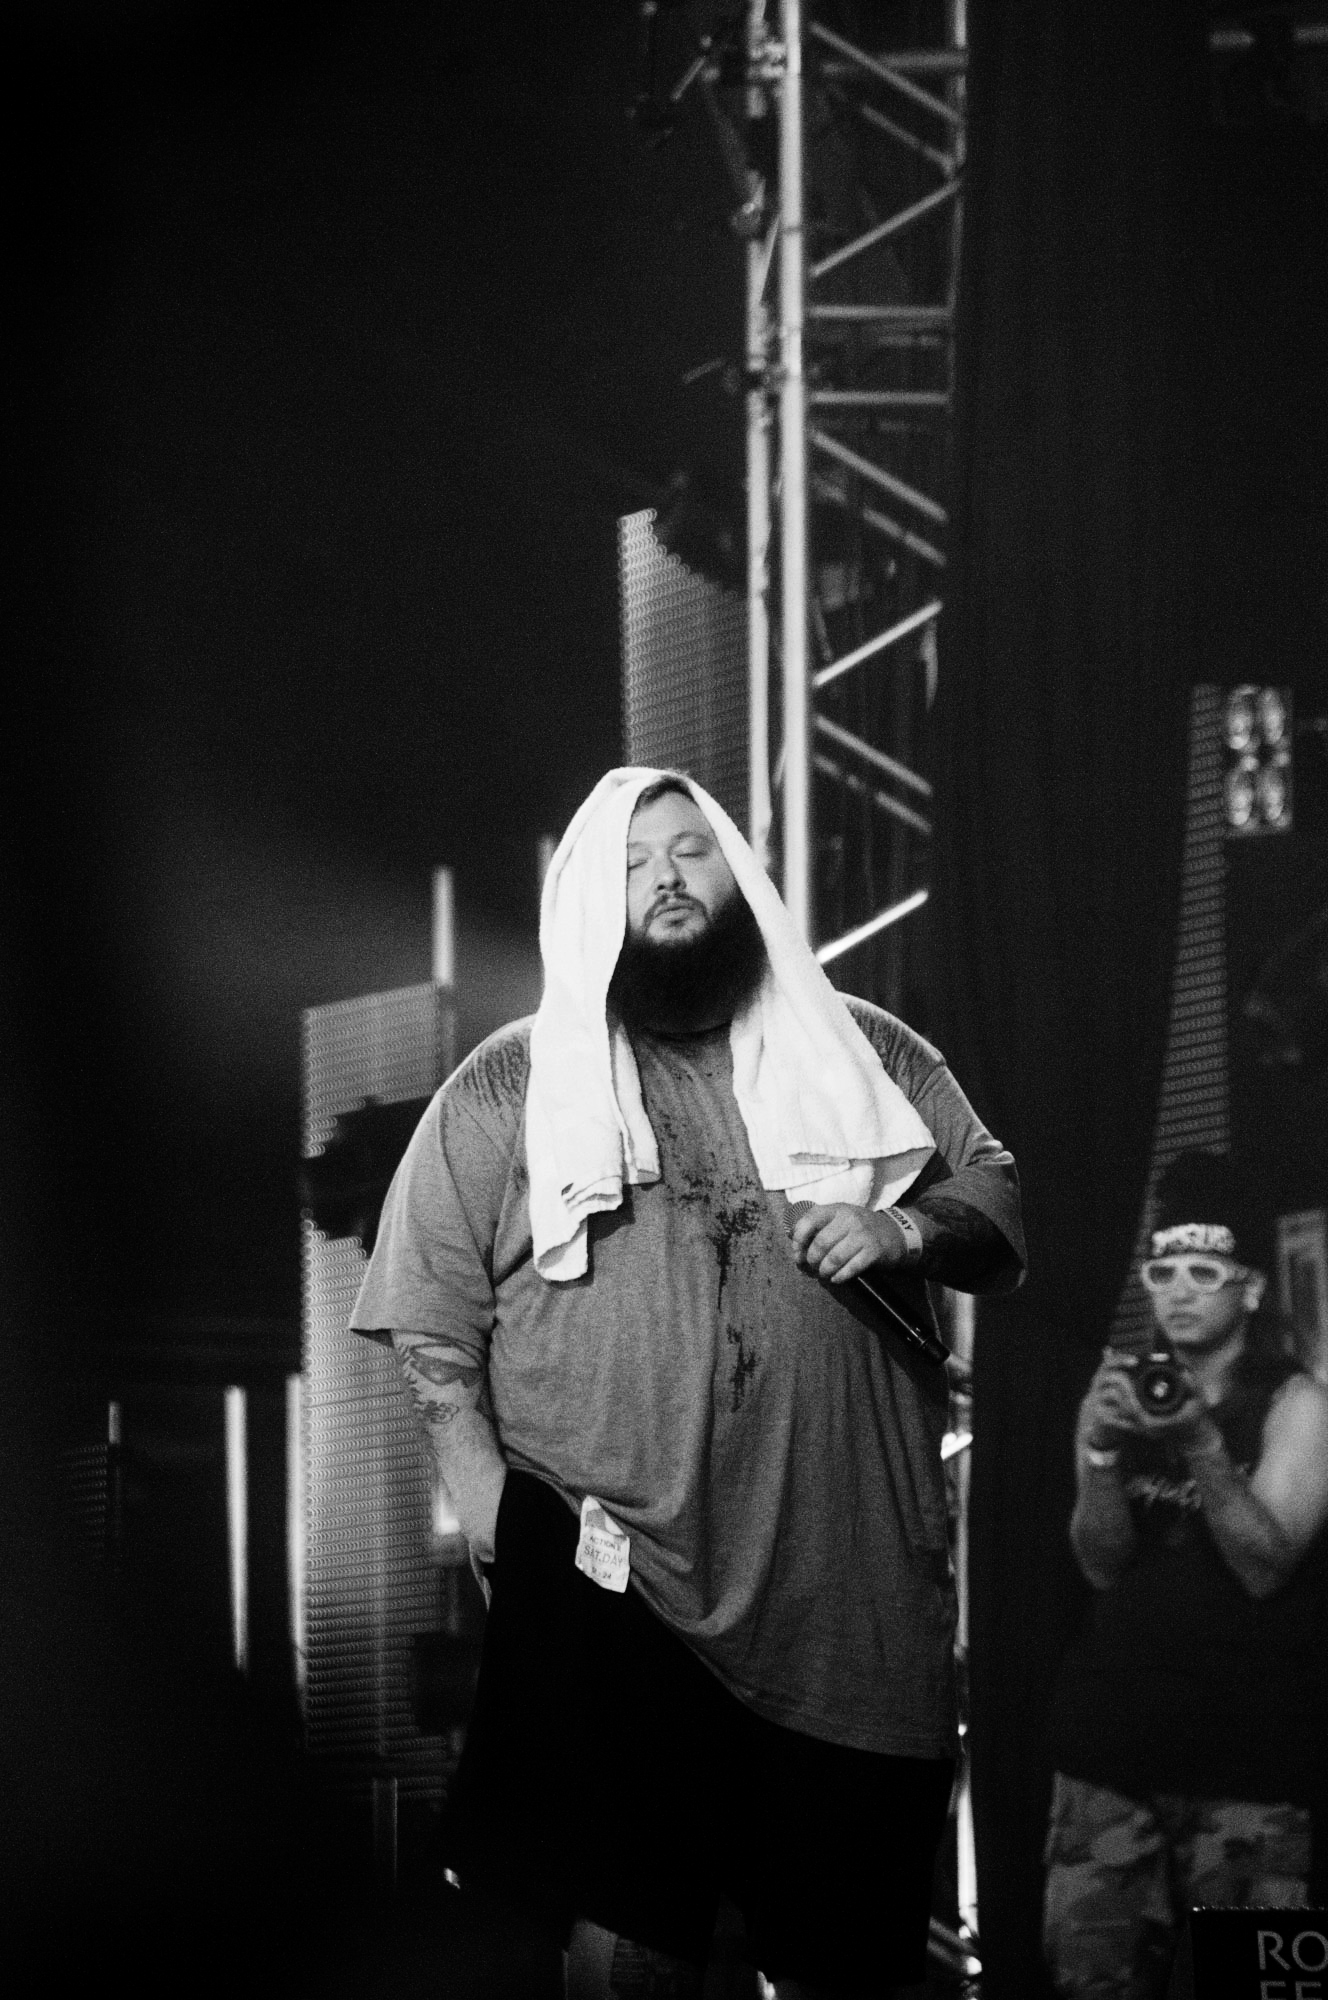 Action Bronson at Roskilde 2013